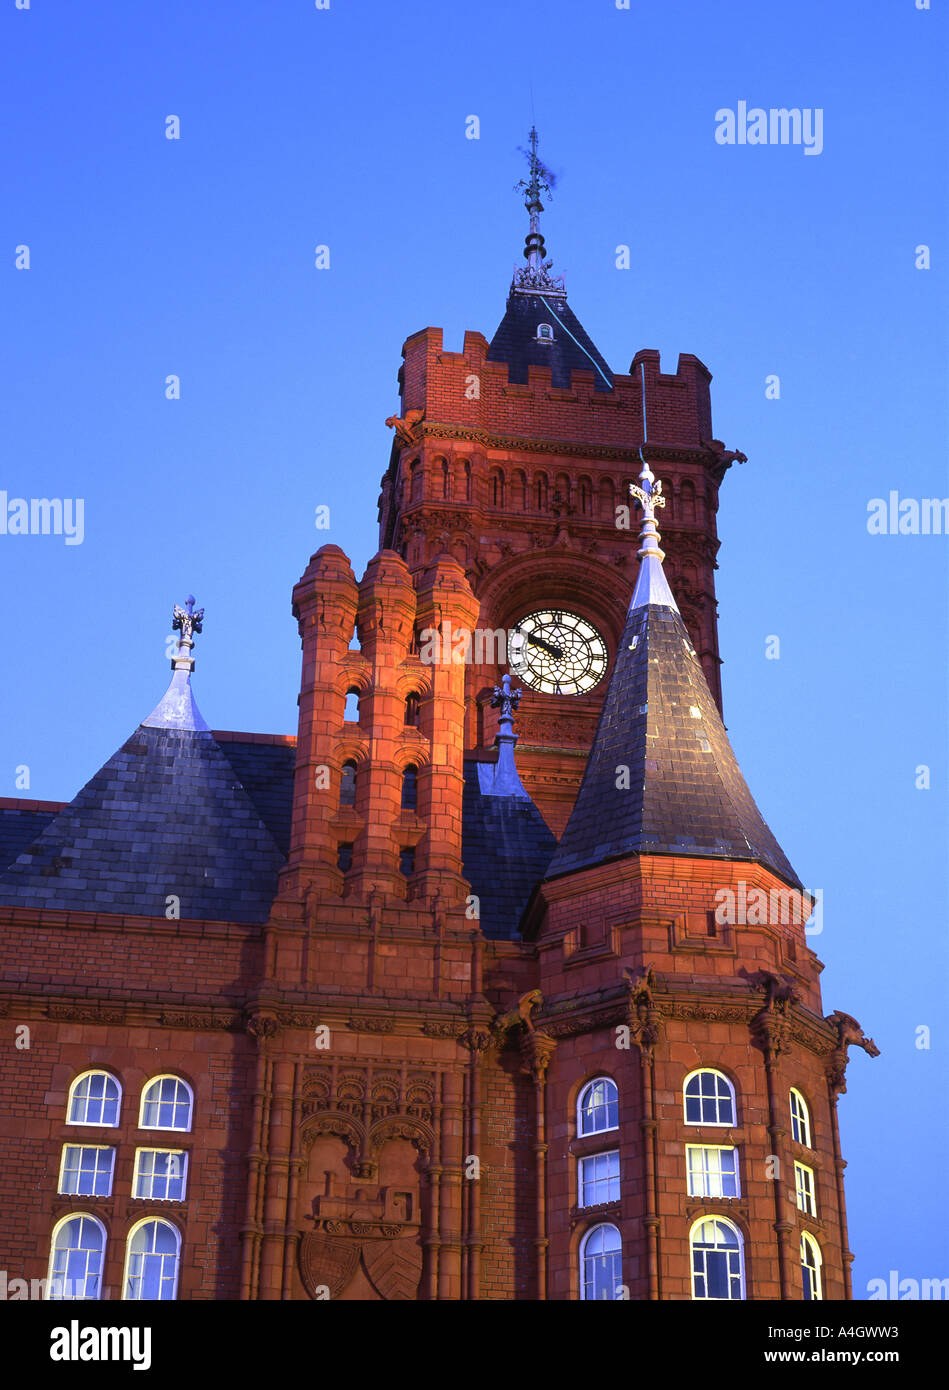 Cardiff Bay Pierhead Building at night Cardiff South Wales UK Stock Photo